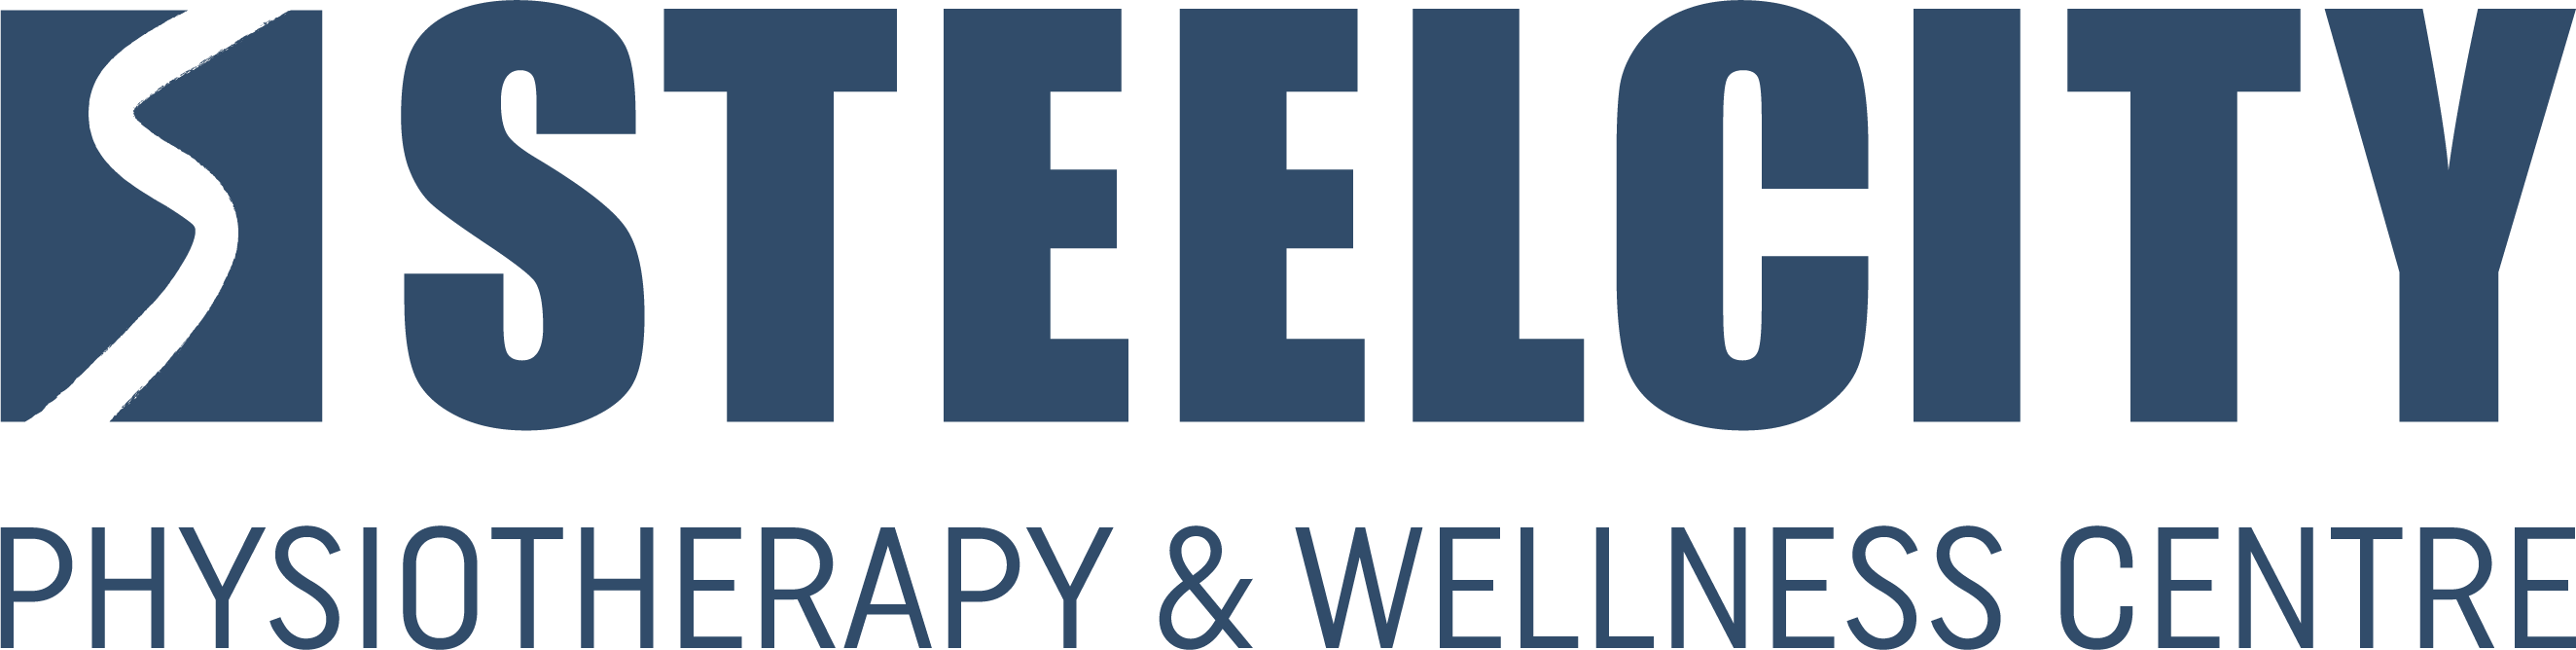 Steelcity Physiotheraphy and wellness centre